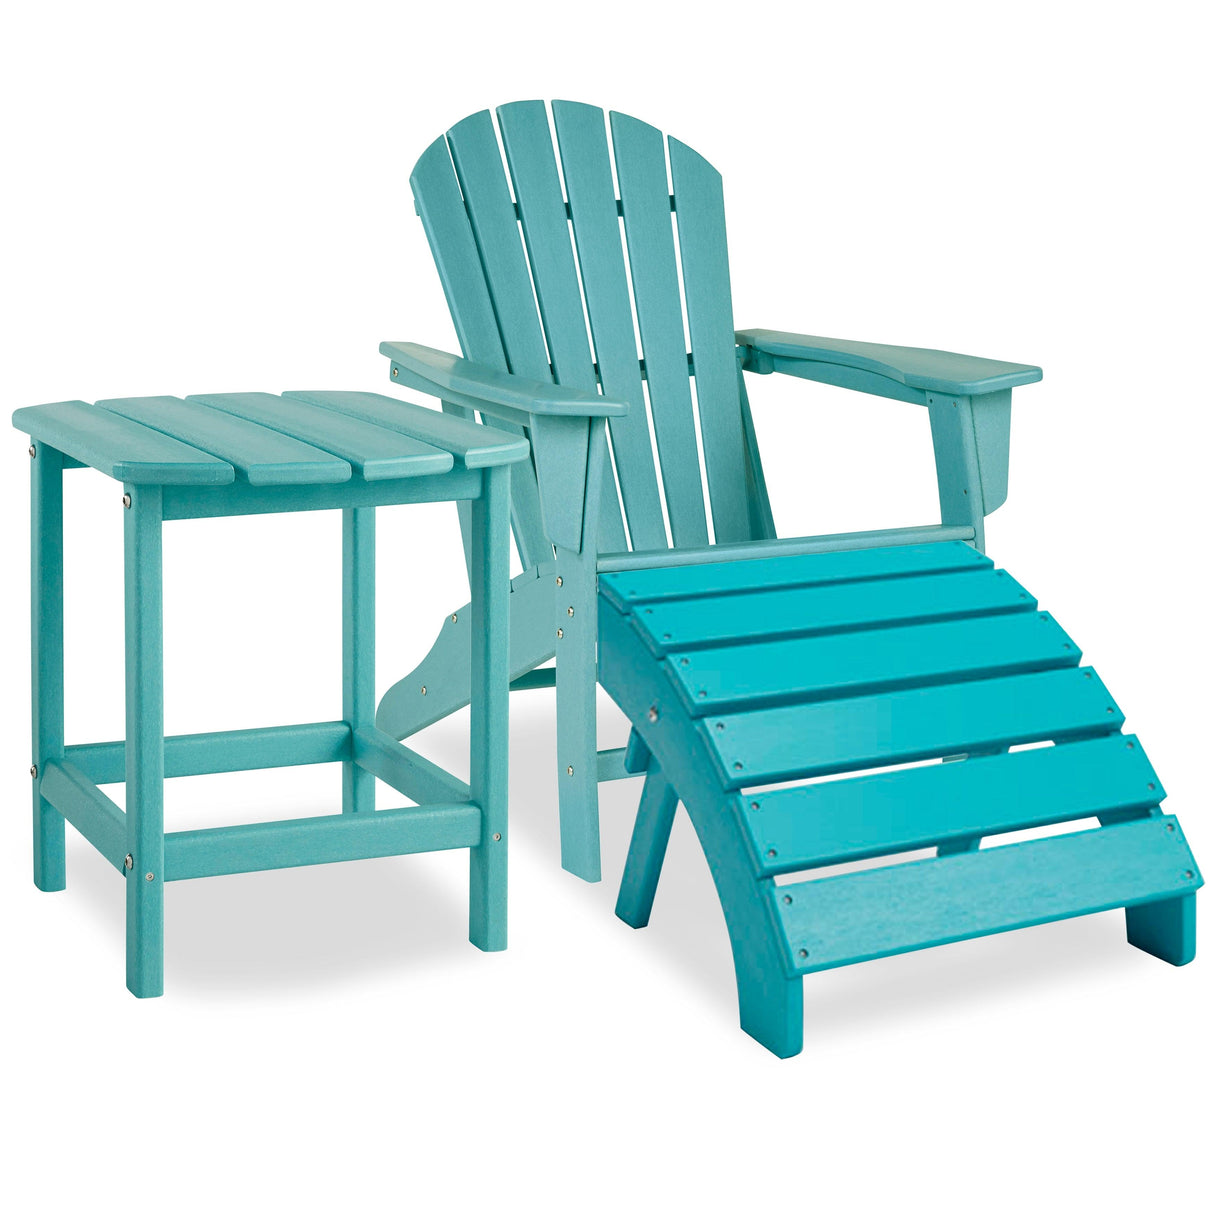 Sundown Turquoise Treasure Outdoor Adirondack Chair And Ottoman With Side Table - Ella Furniture